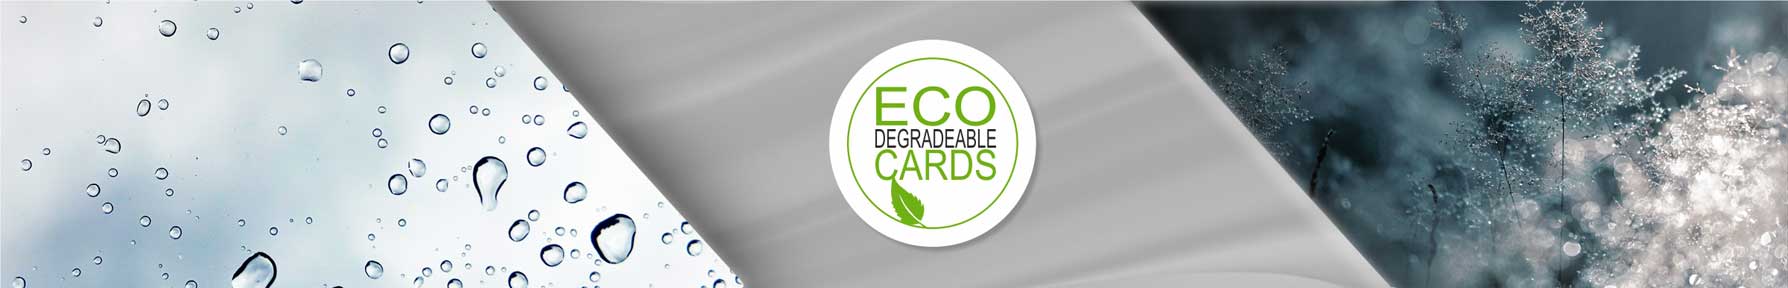 Frosted clear cards recyclable plastic from Premier Eco Cards